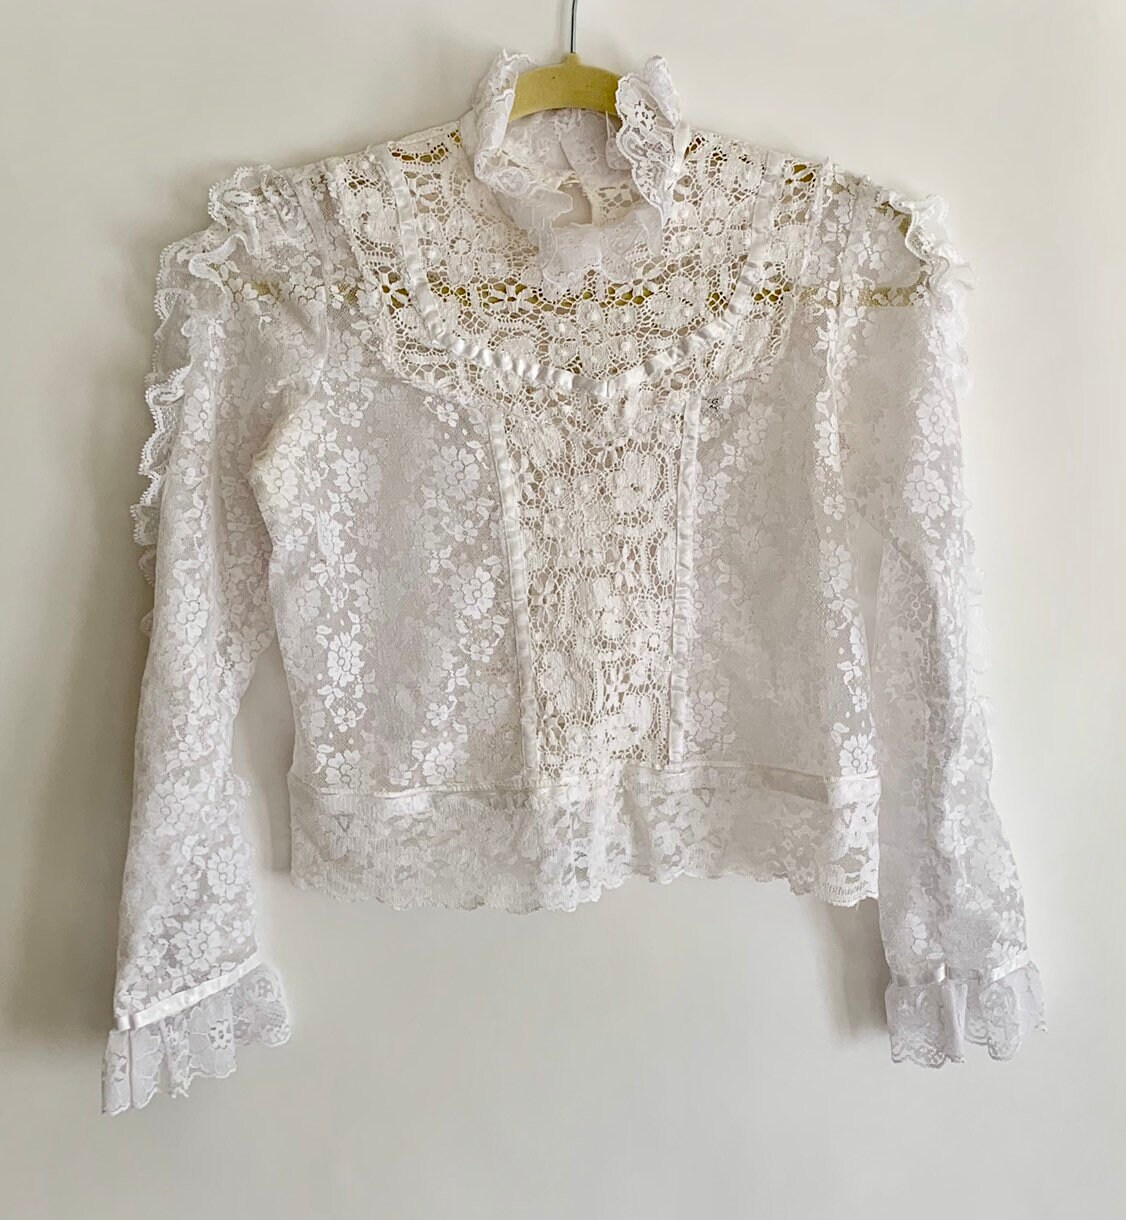 White Lace Top Victorian Edwardian Style Vintage 70s High Neck Satin ...